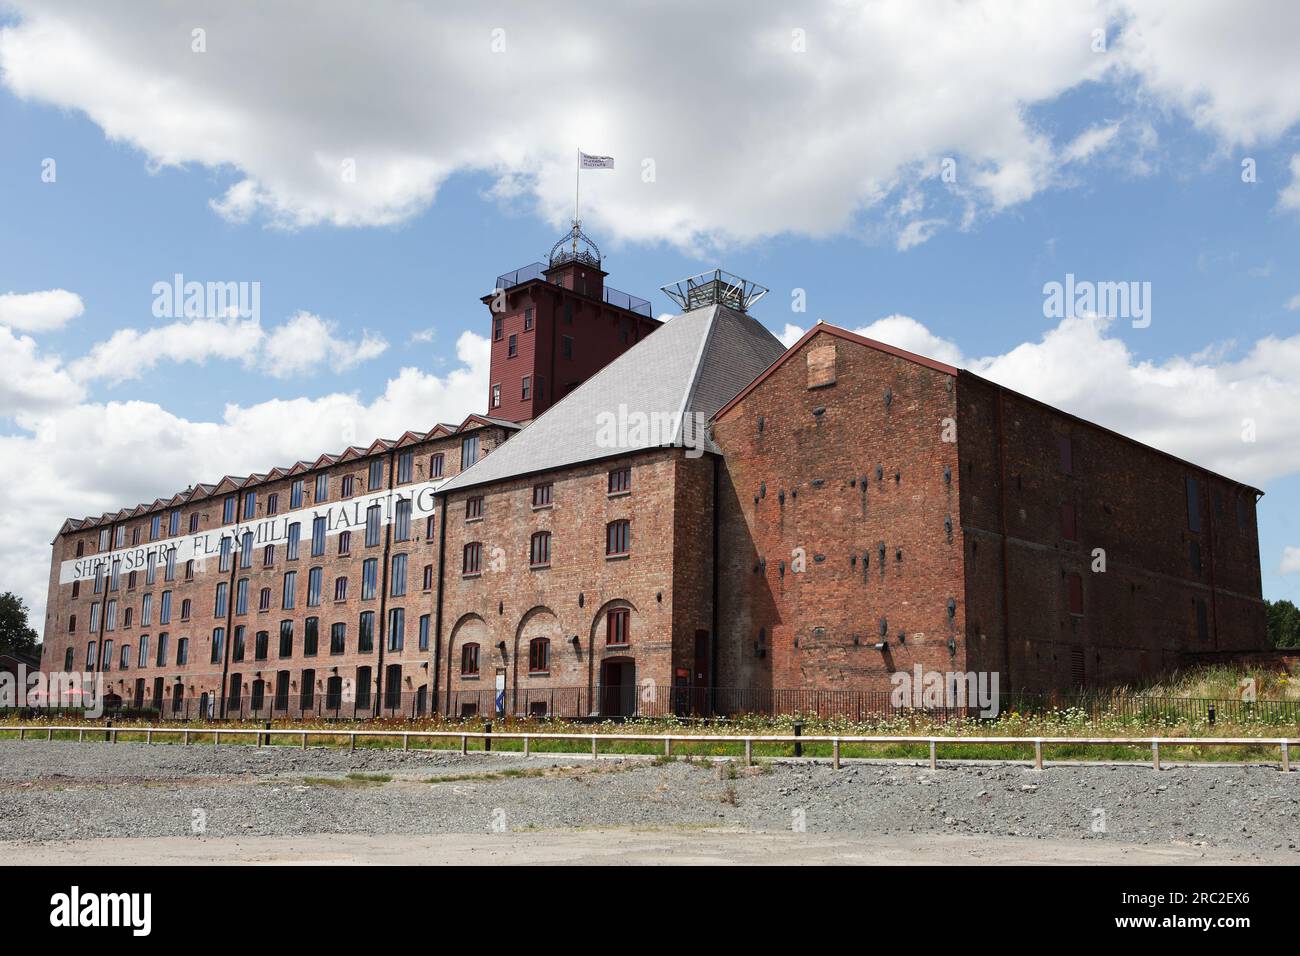 External elevation of the recent restoration of Shrewsbury Flaxmill Maltings. The building was the world's first iron-framed building. Stock Photo